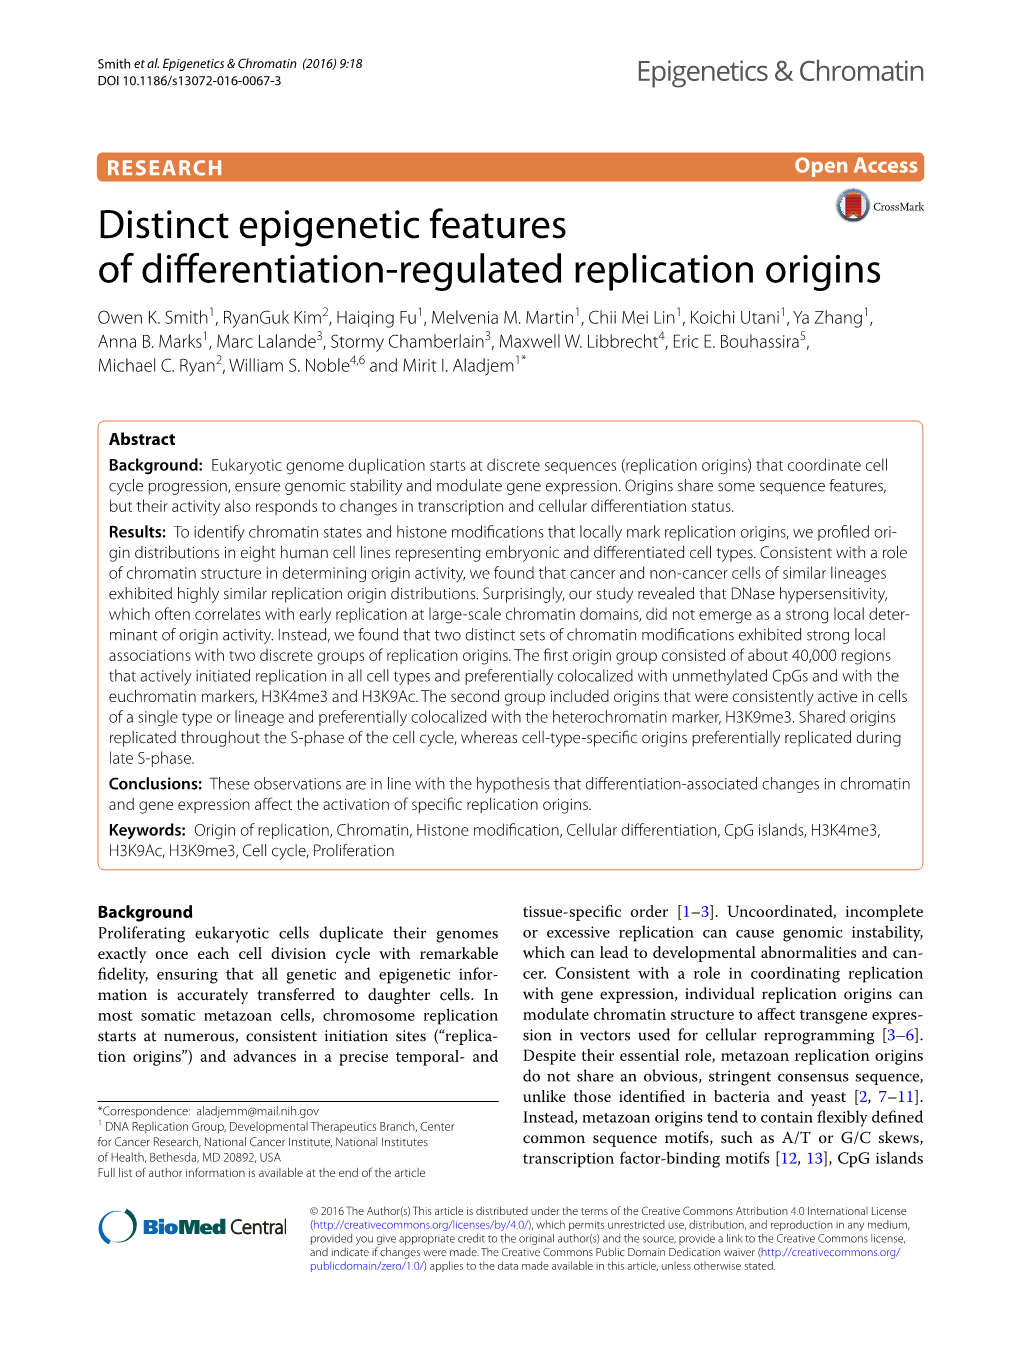 Distinct Epigenetic Features of Differentiation-Regulated Replication